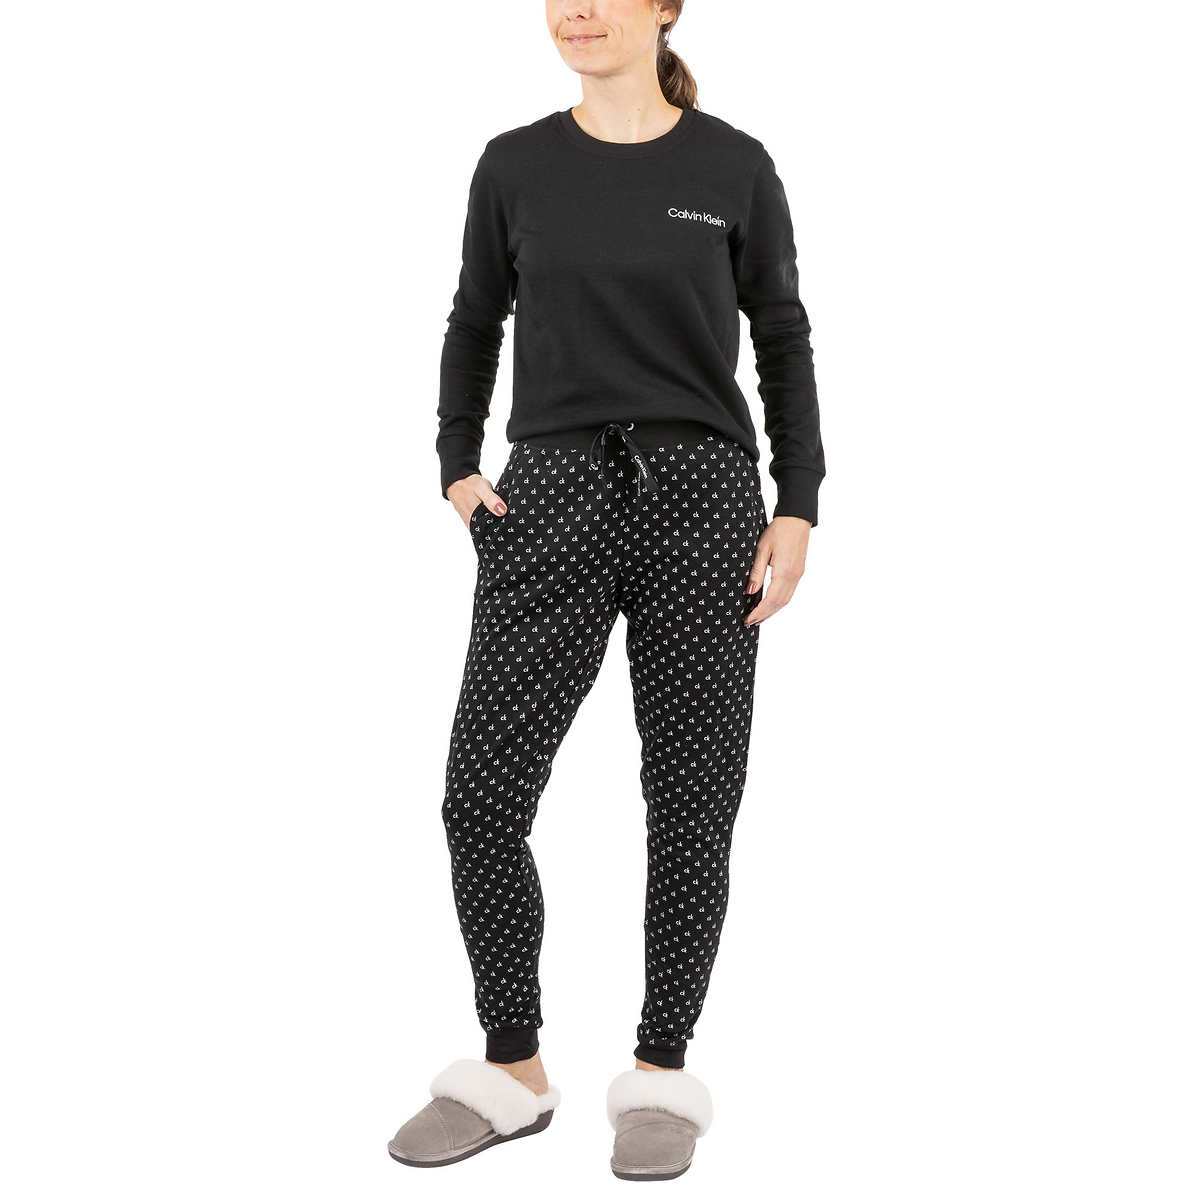 Shop Calvin Klein Unisex Street Style Co-ord Loungewear Two-Piece Sets by  ☆skyberry